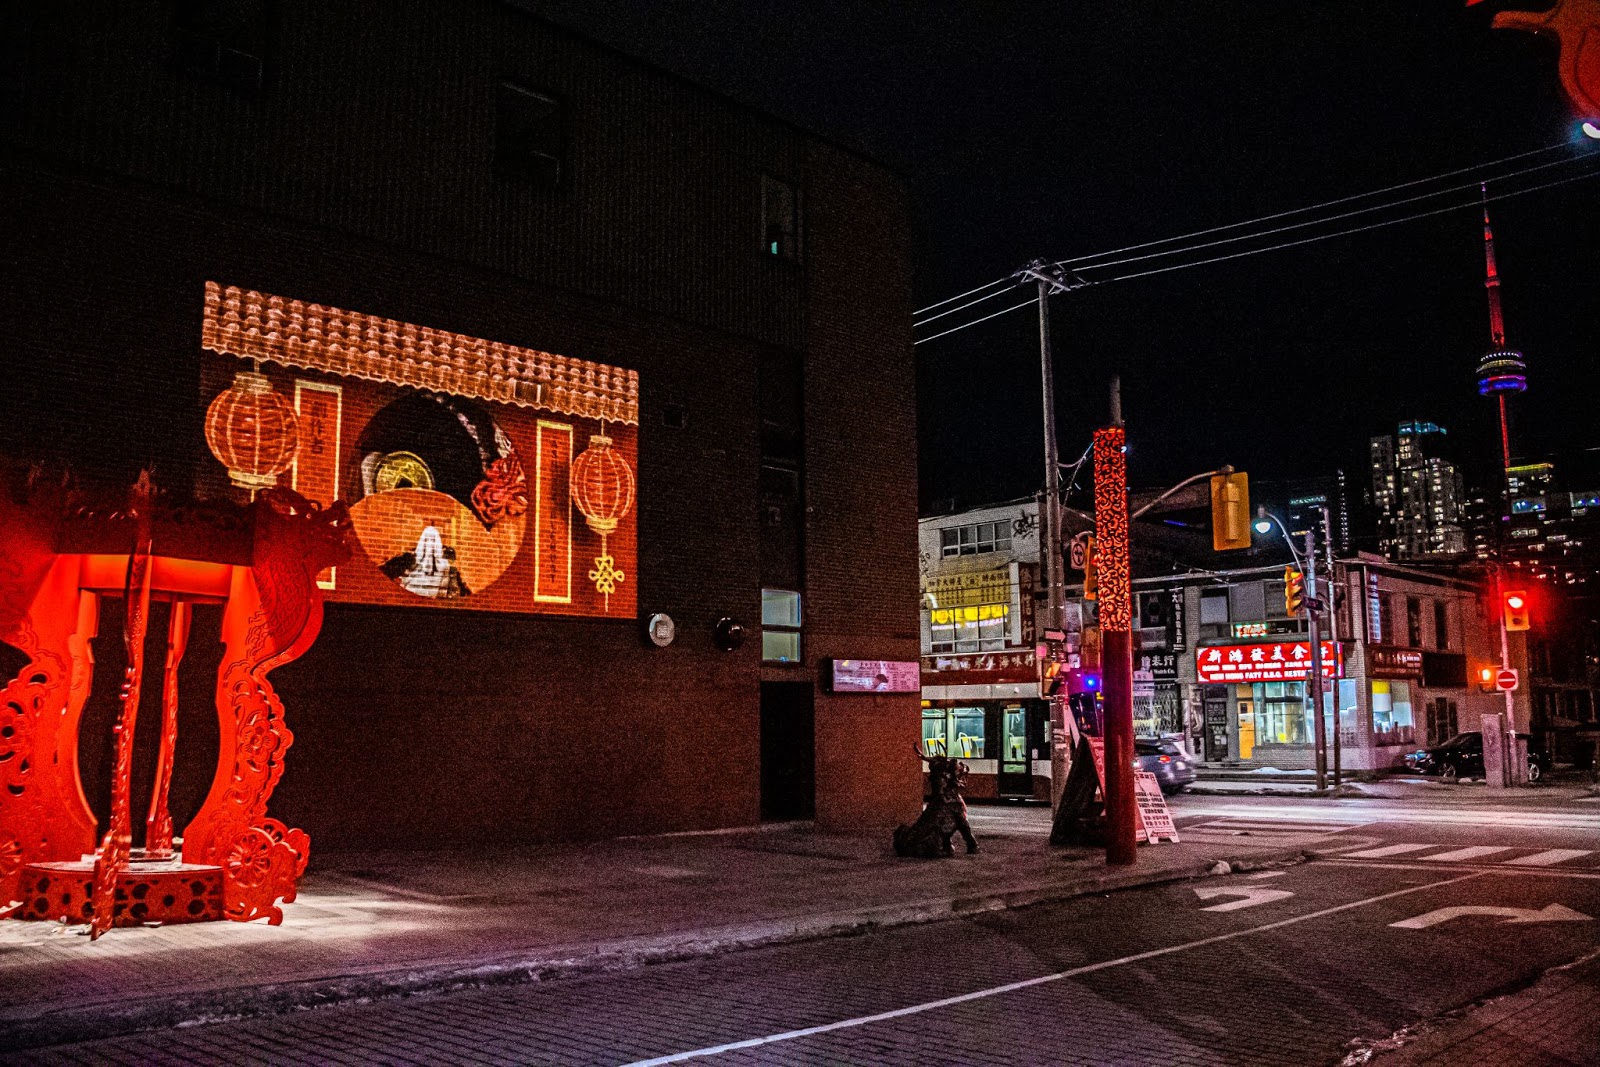 Snapshot of Toronto's Chinatown on a cold winter night. The CN Tower is lit up with rainbow colours faintly visible in the background. The Animated Light stop-motion feature, seen on the left on the side of Chinese Gospel Church, lights up the streets with bright and vivid shades of red for Lunar New Year. 